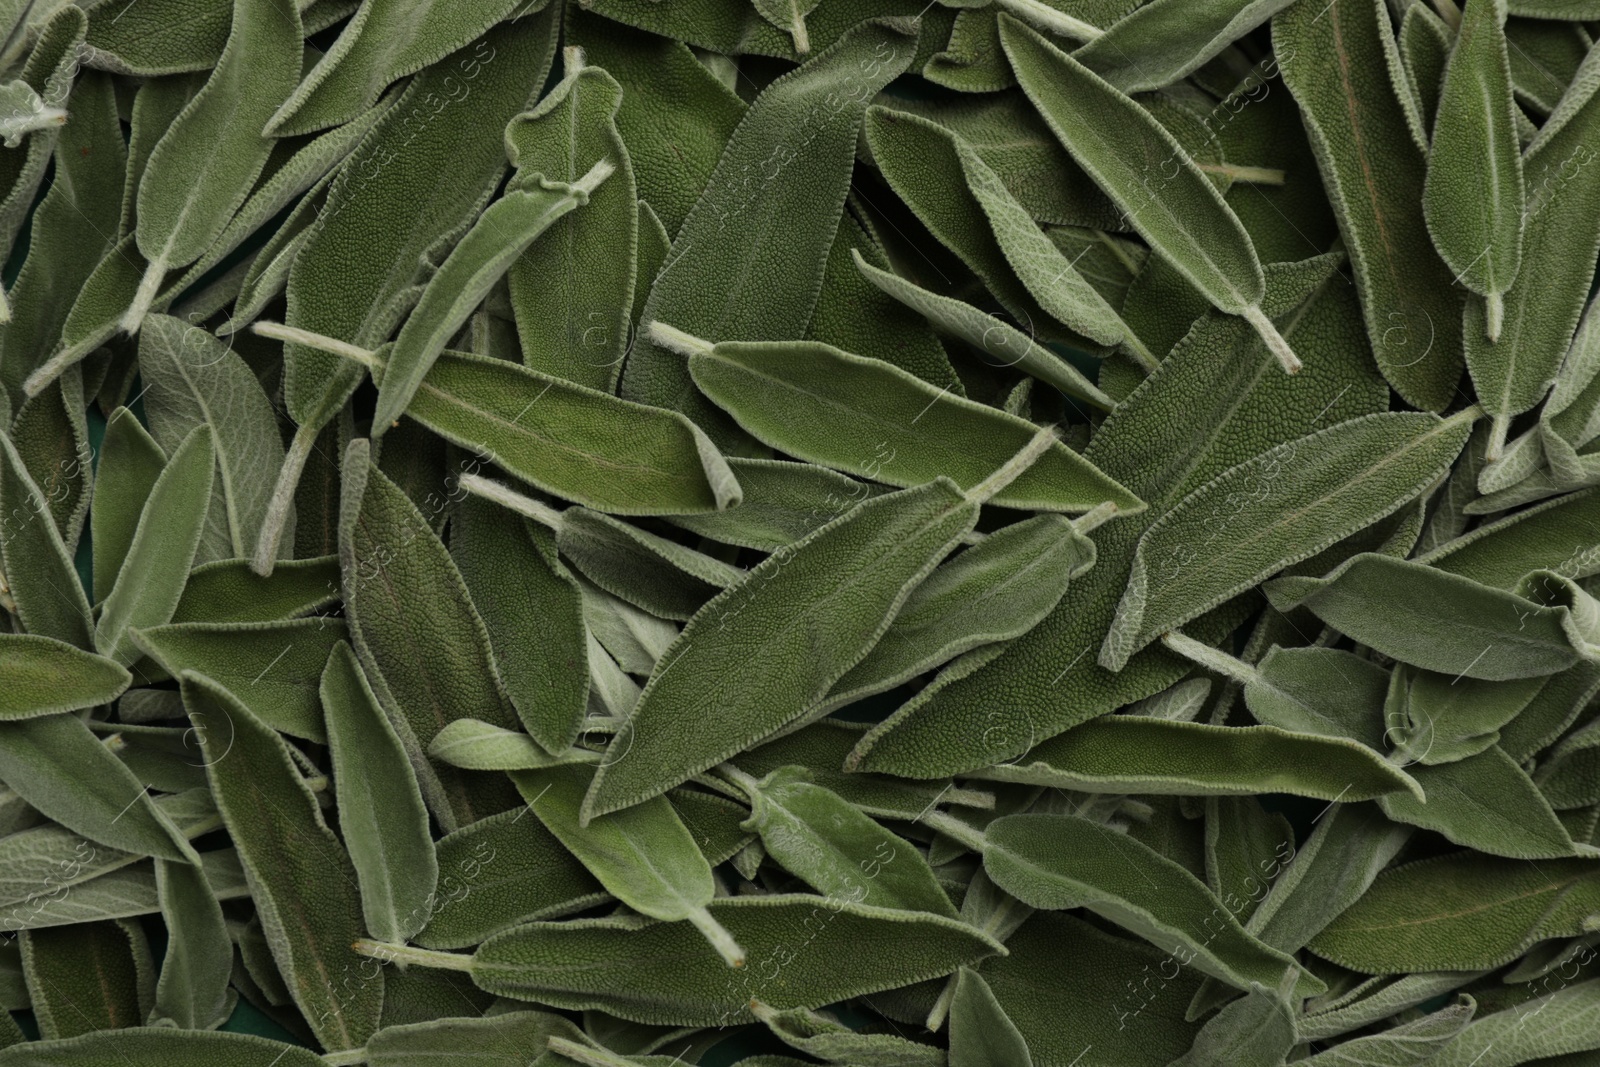 Photo of Fresh green sage leaves as background, top view